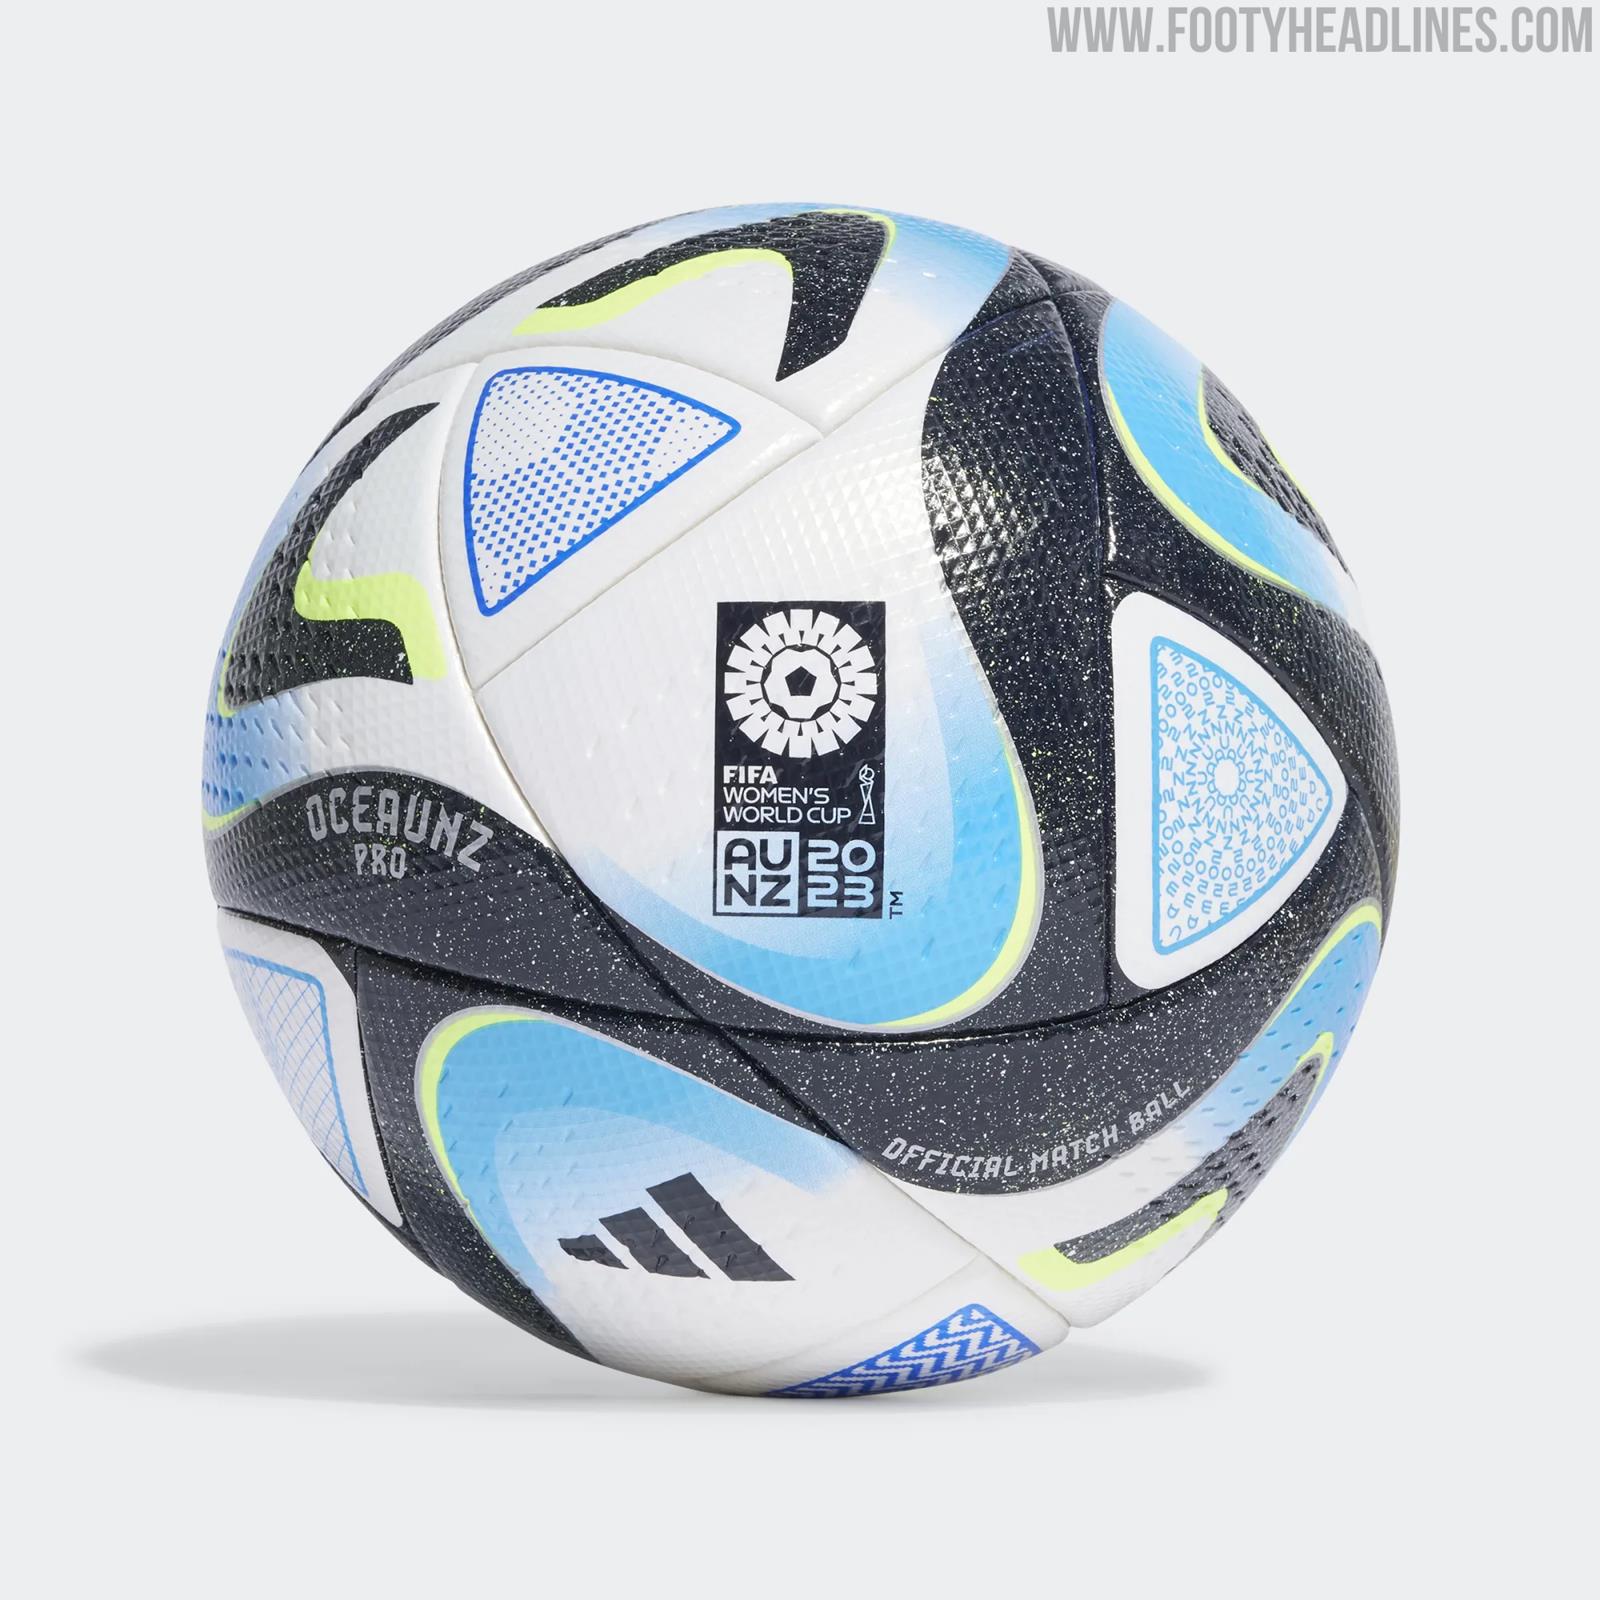 Official match ball for the Women's World Cup unveiled